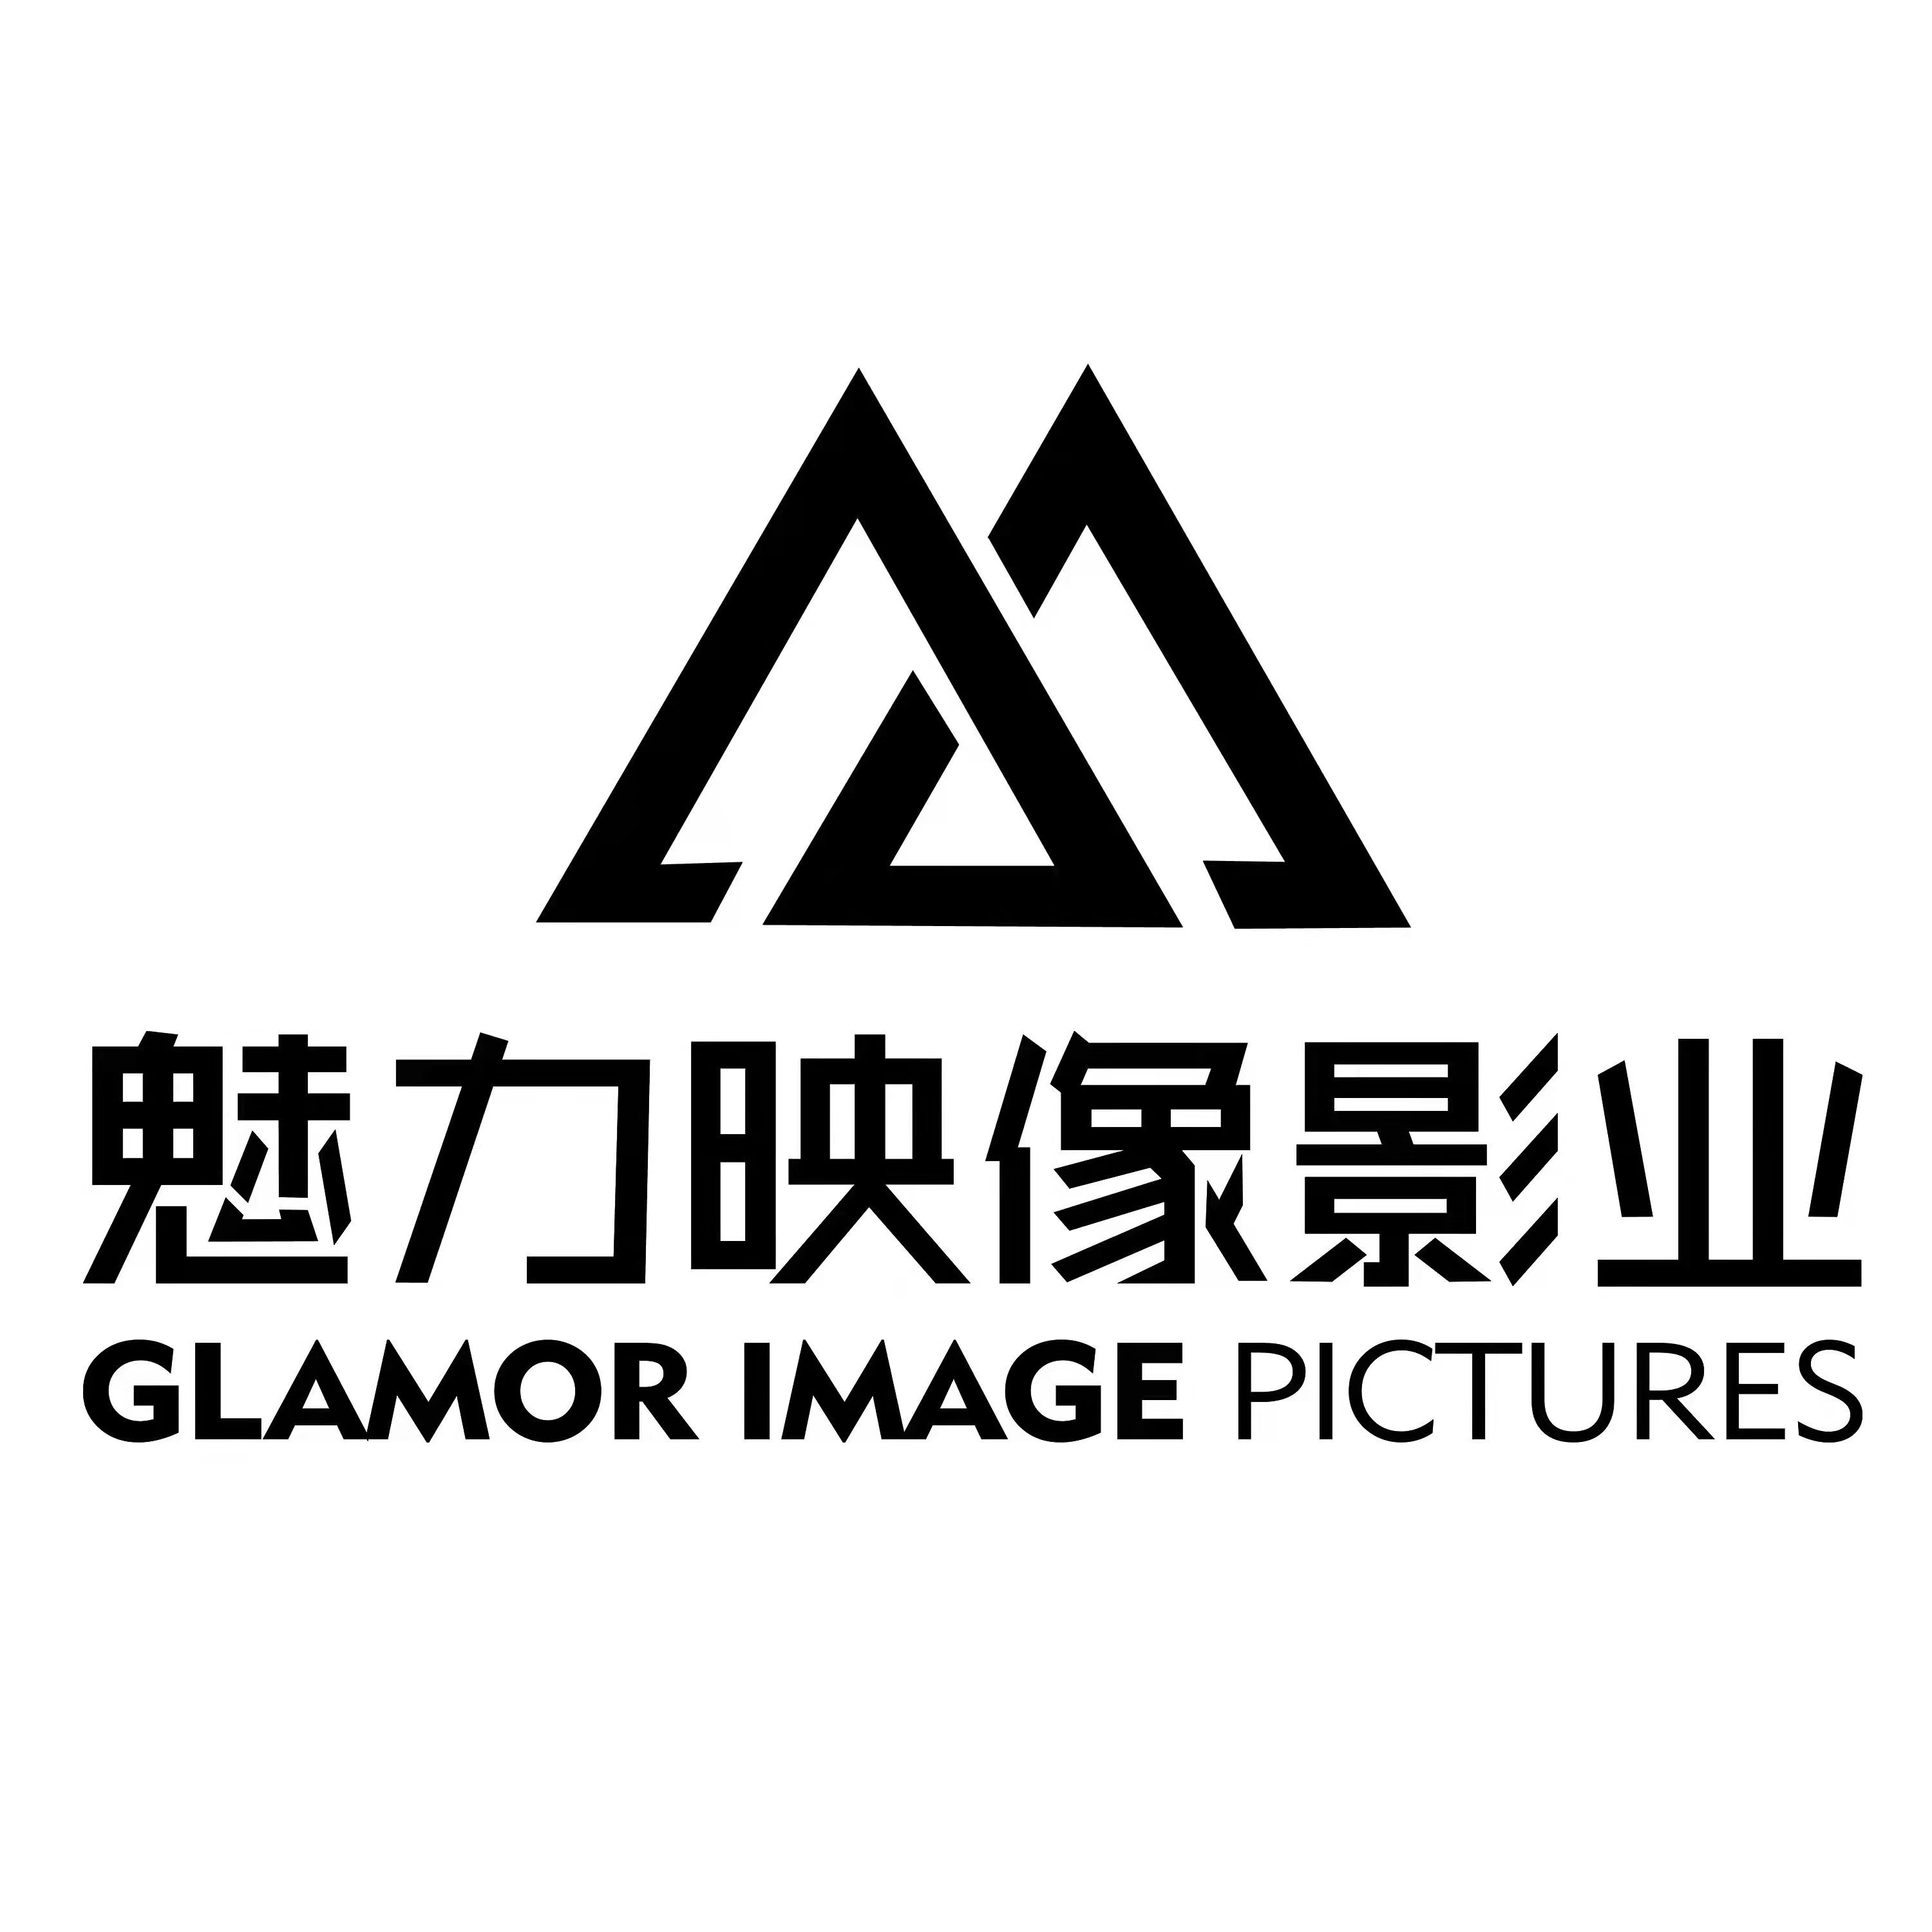 GLAMOR IMAGE PICTURES